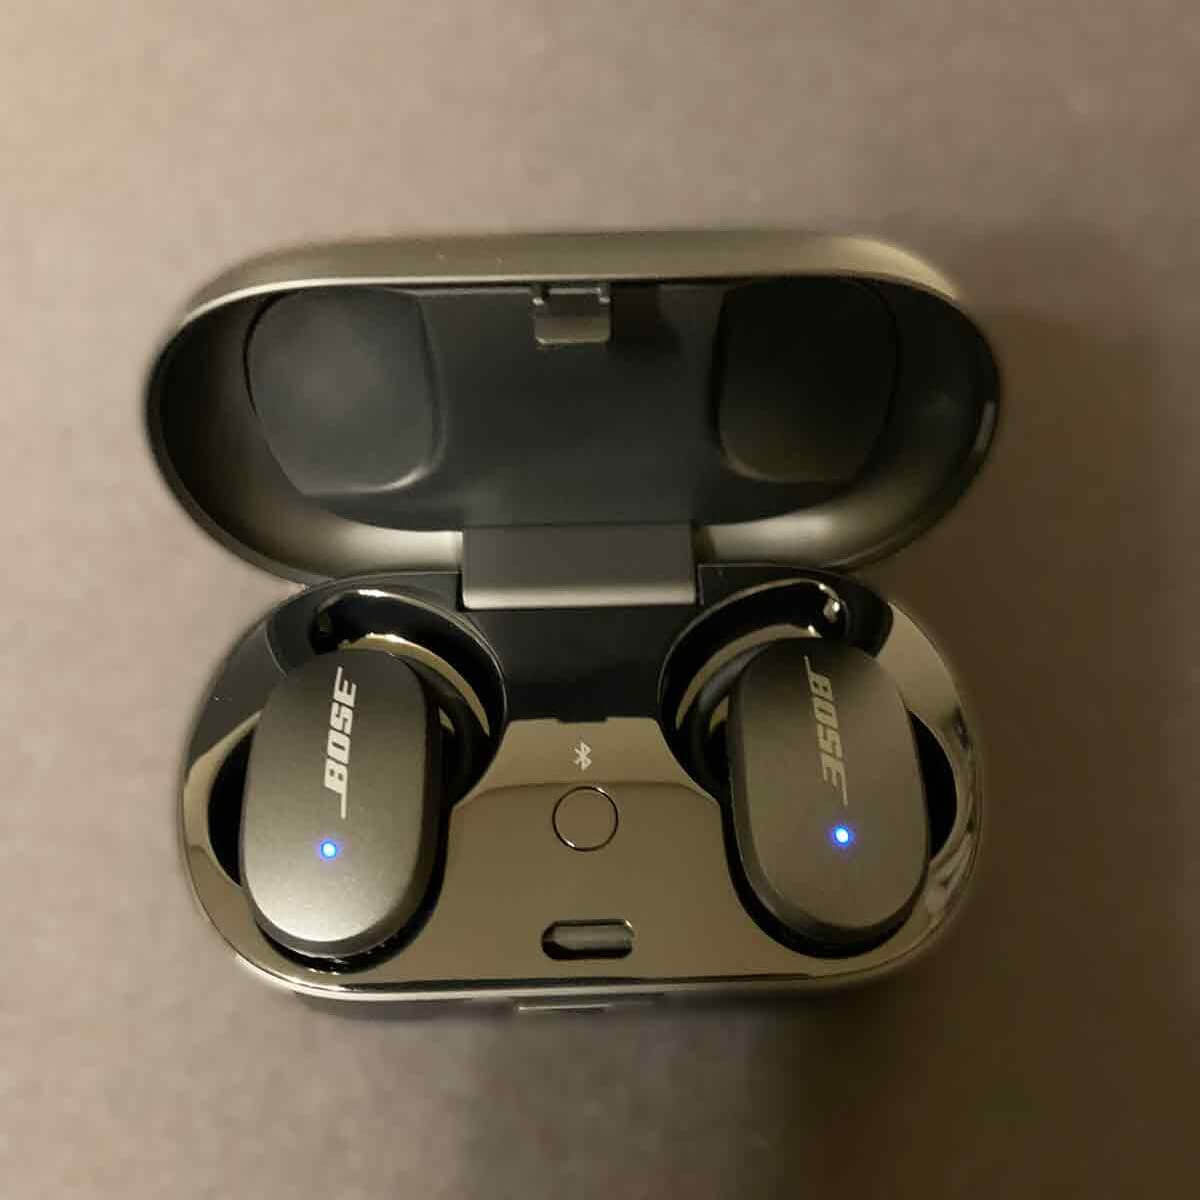 Boseの新作イヤホン quietcomfort earbuds を買いました